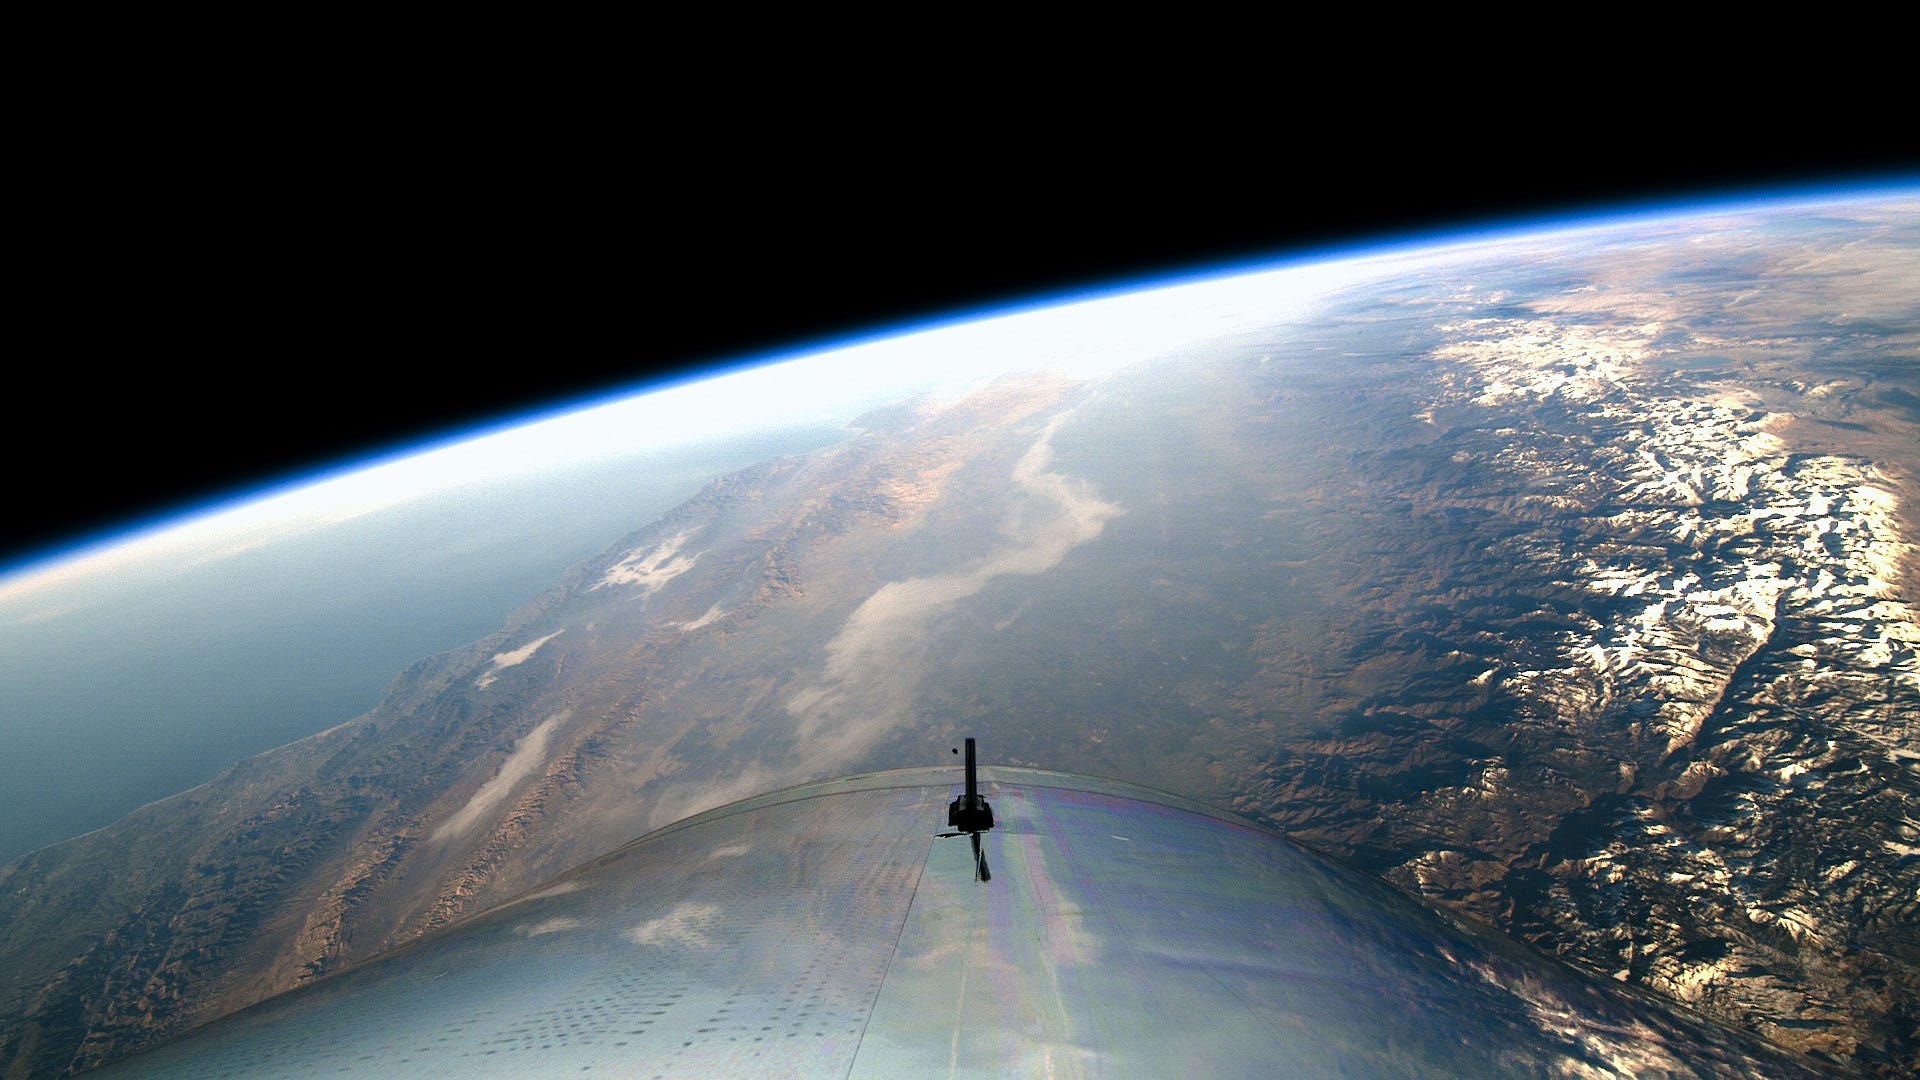 A view of Earth's surface and curvature from space aboard Virgin Galactic's vehicle.